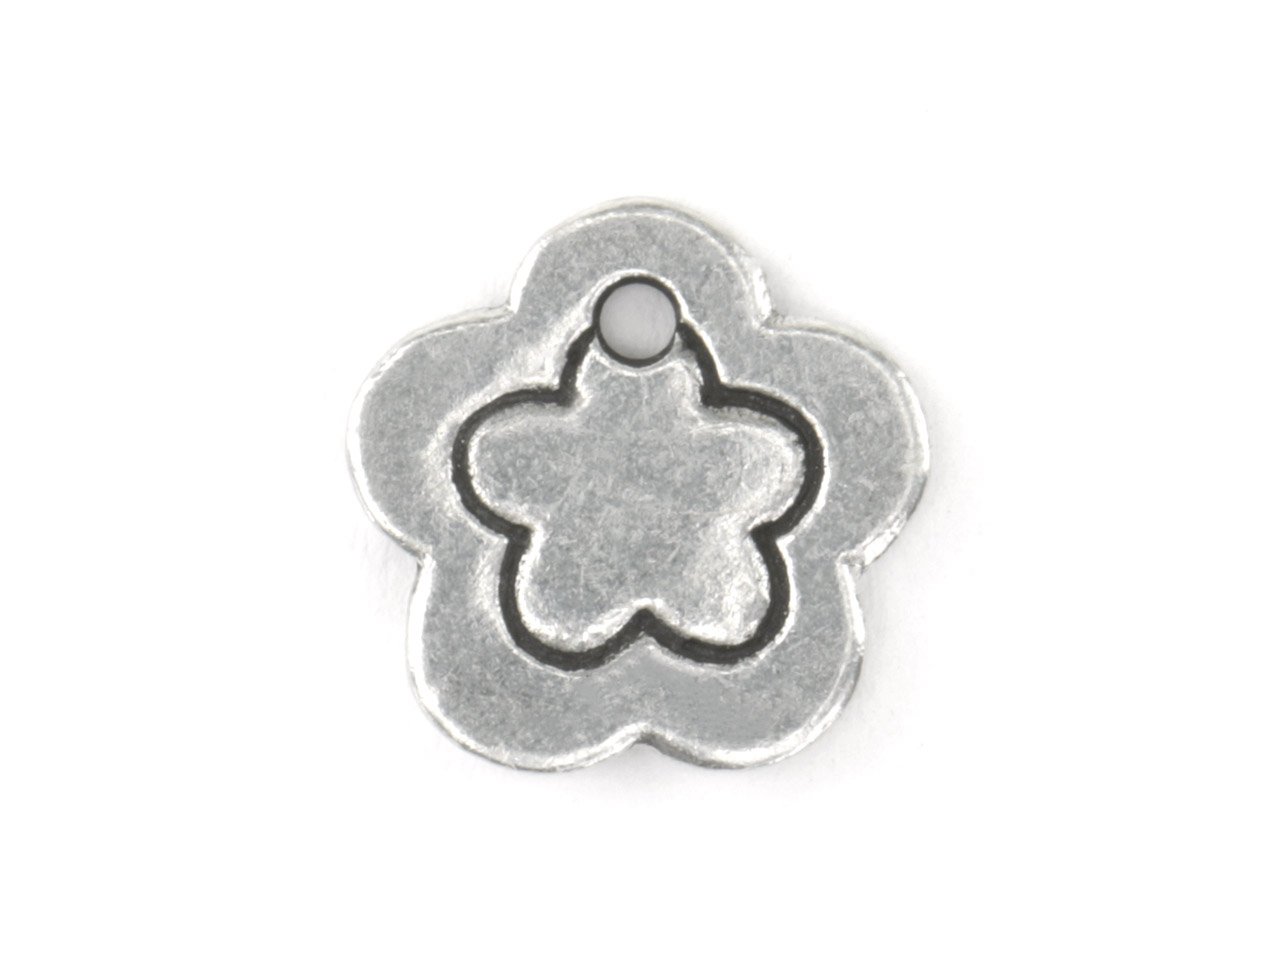 ImpressArt Small Flower Border Pewter Stamping Blank Clearance